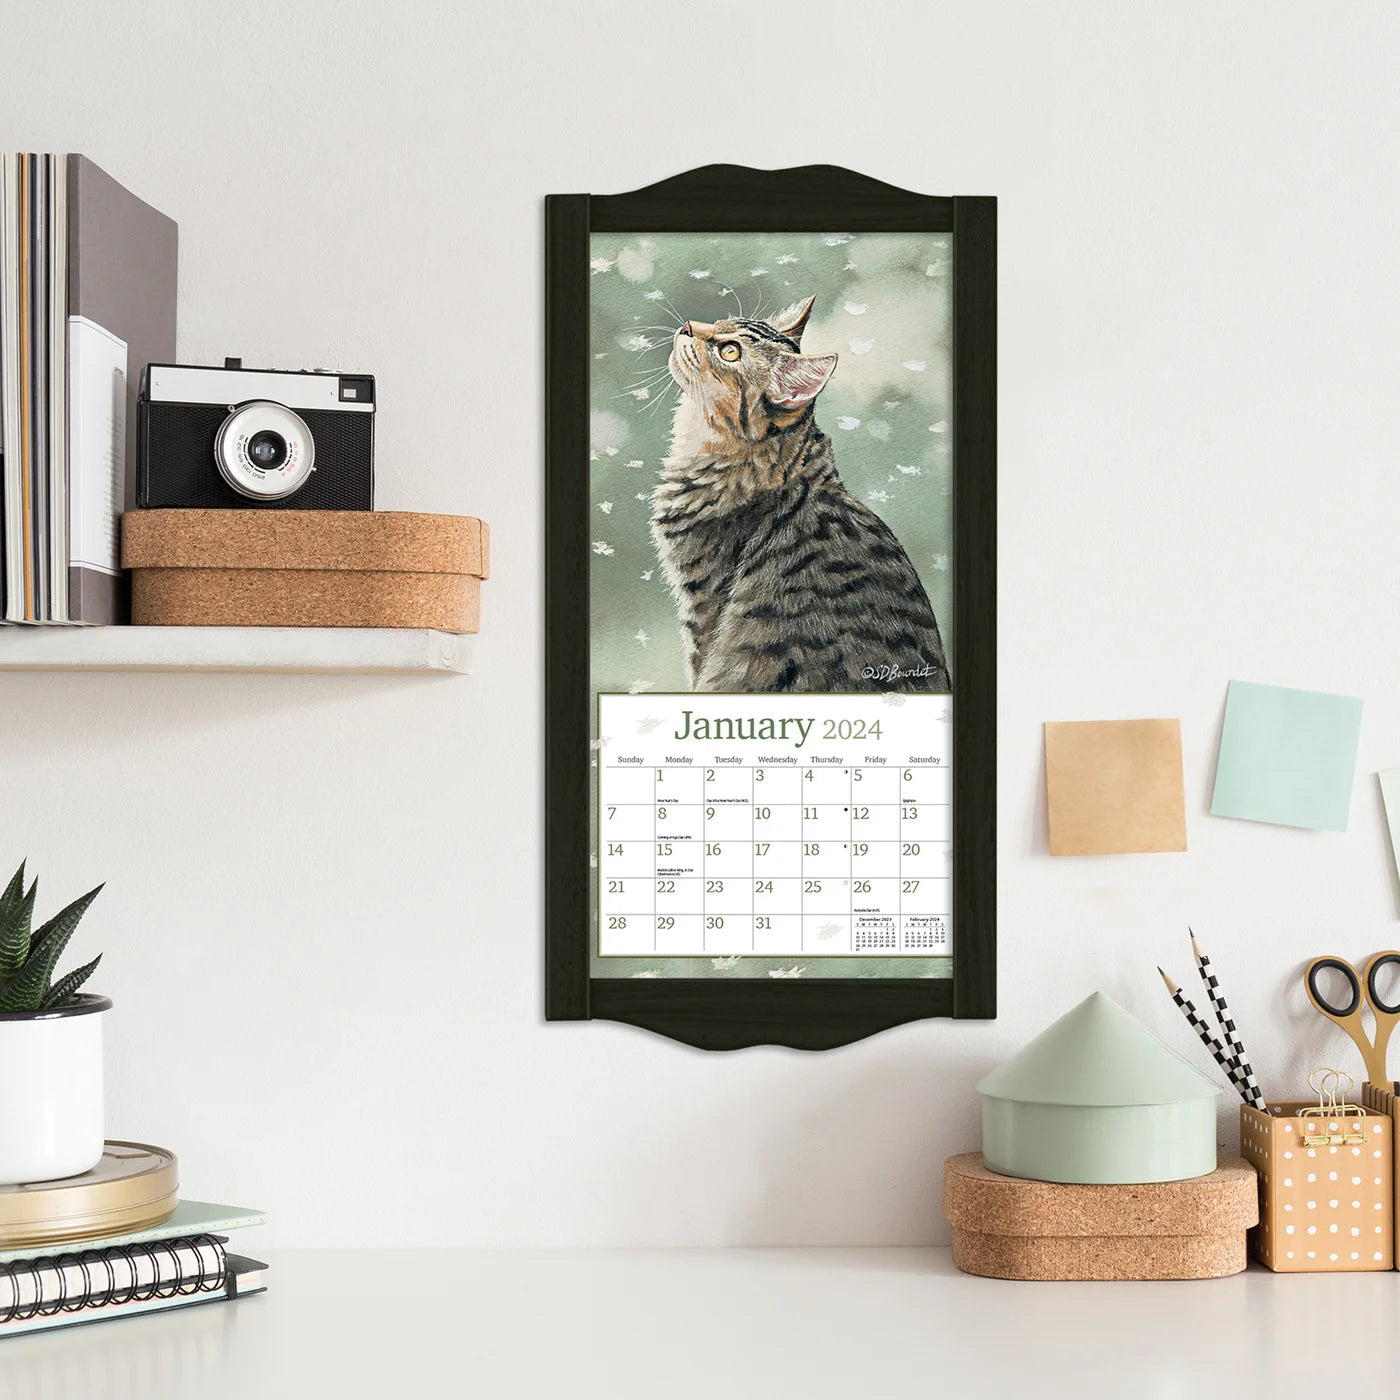 2024 Cats In The Country - Slim Wall Calendar